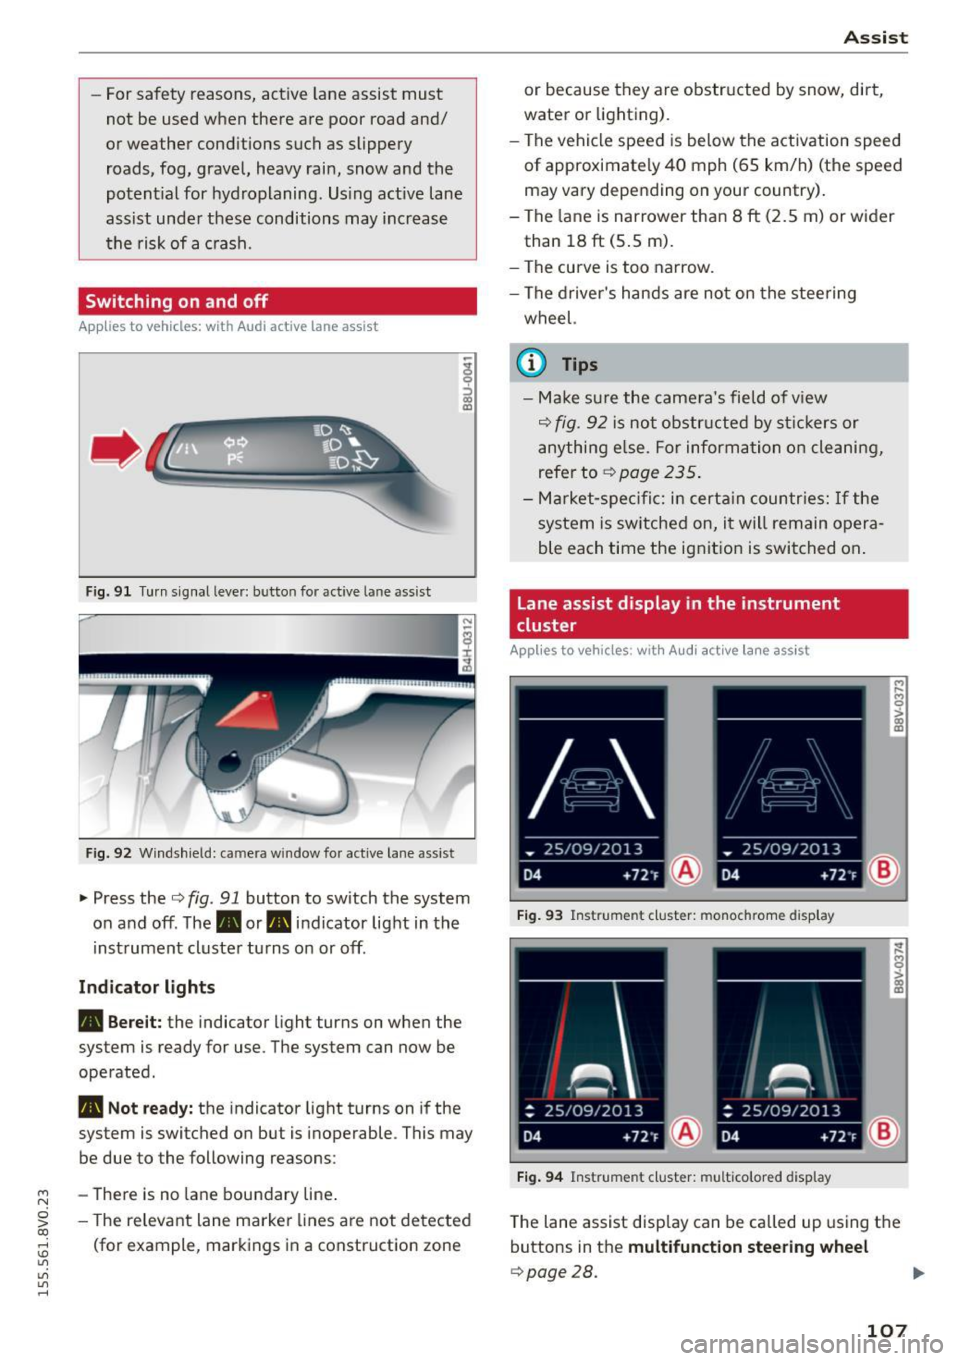 AUDI S3 SEDAN 2015  Owners Manual ...., 
N 
0 > co 
rl I.O 
" 
" 
" 
rl 
-For safety  reasons, act ive  lane assist  must 
not  be used when  there  are poor  road and/ 
or  weather  conditions  such as slippery 
roads, fog,  grave